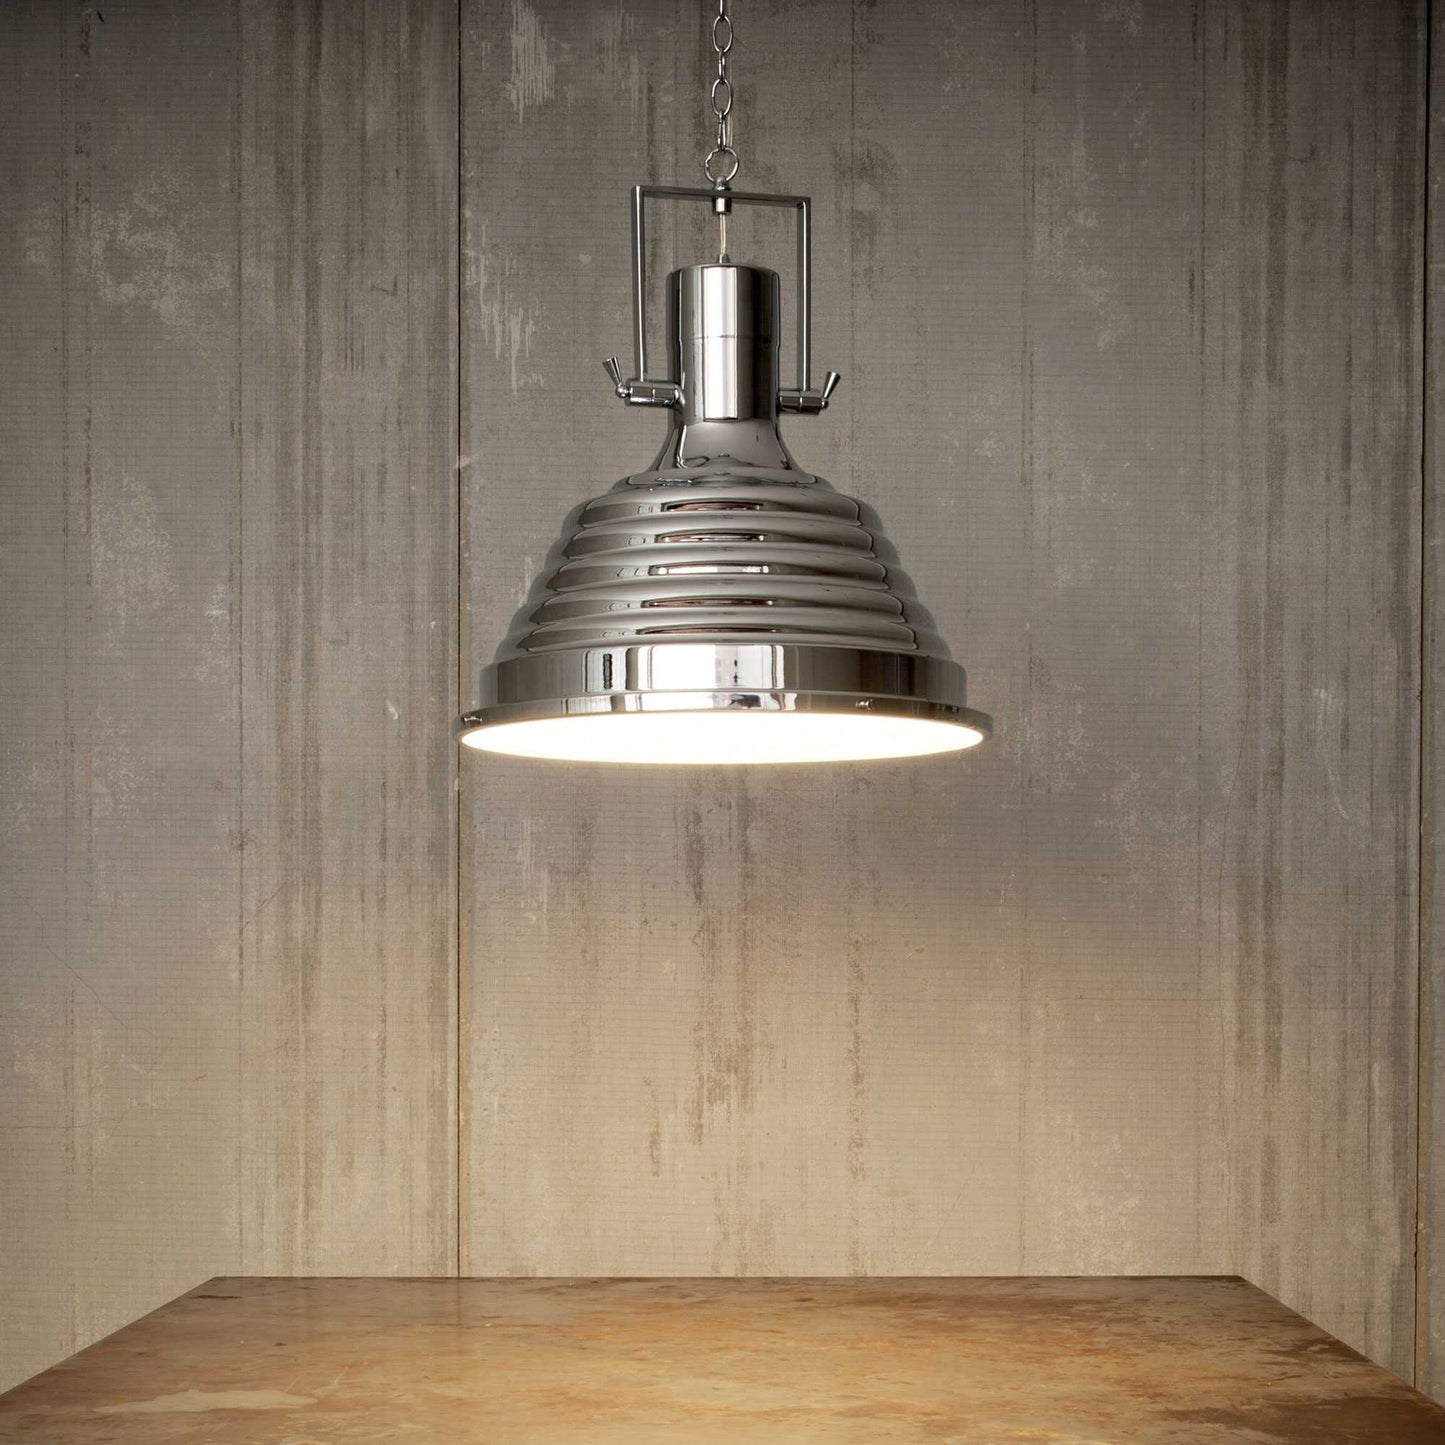 Ideal Lux Fisherman Ceiling Pendant